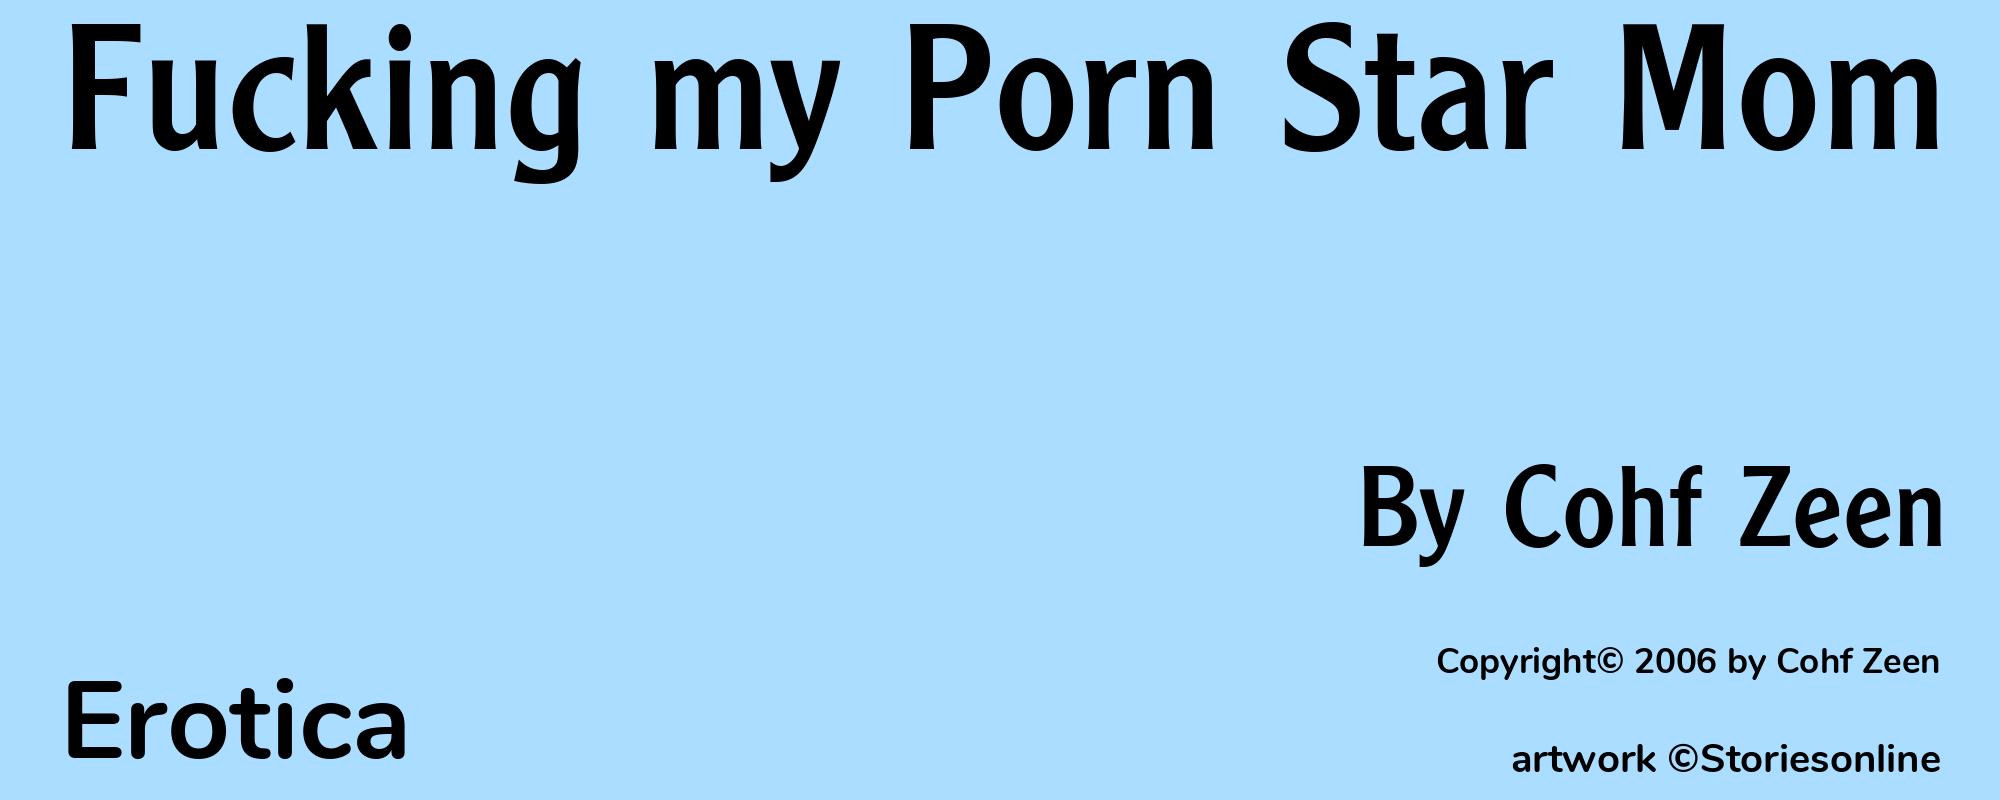 Fucking my Porn Star Mom - Cover